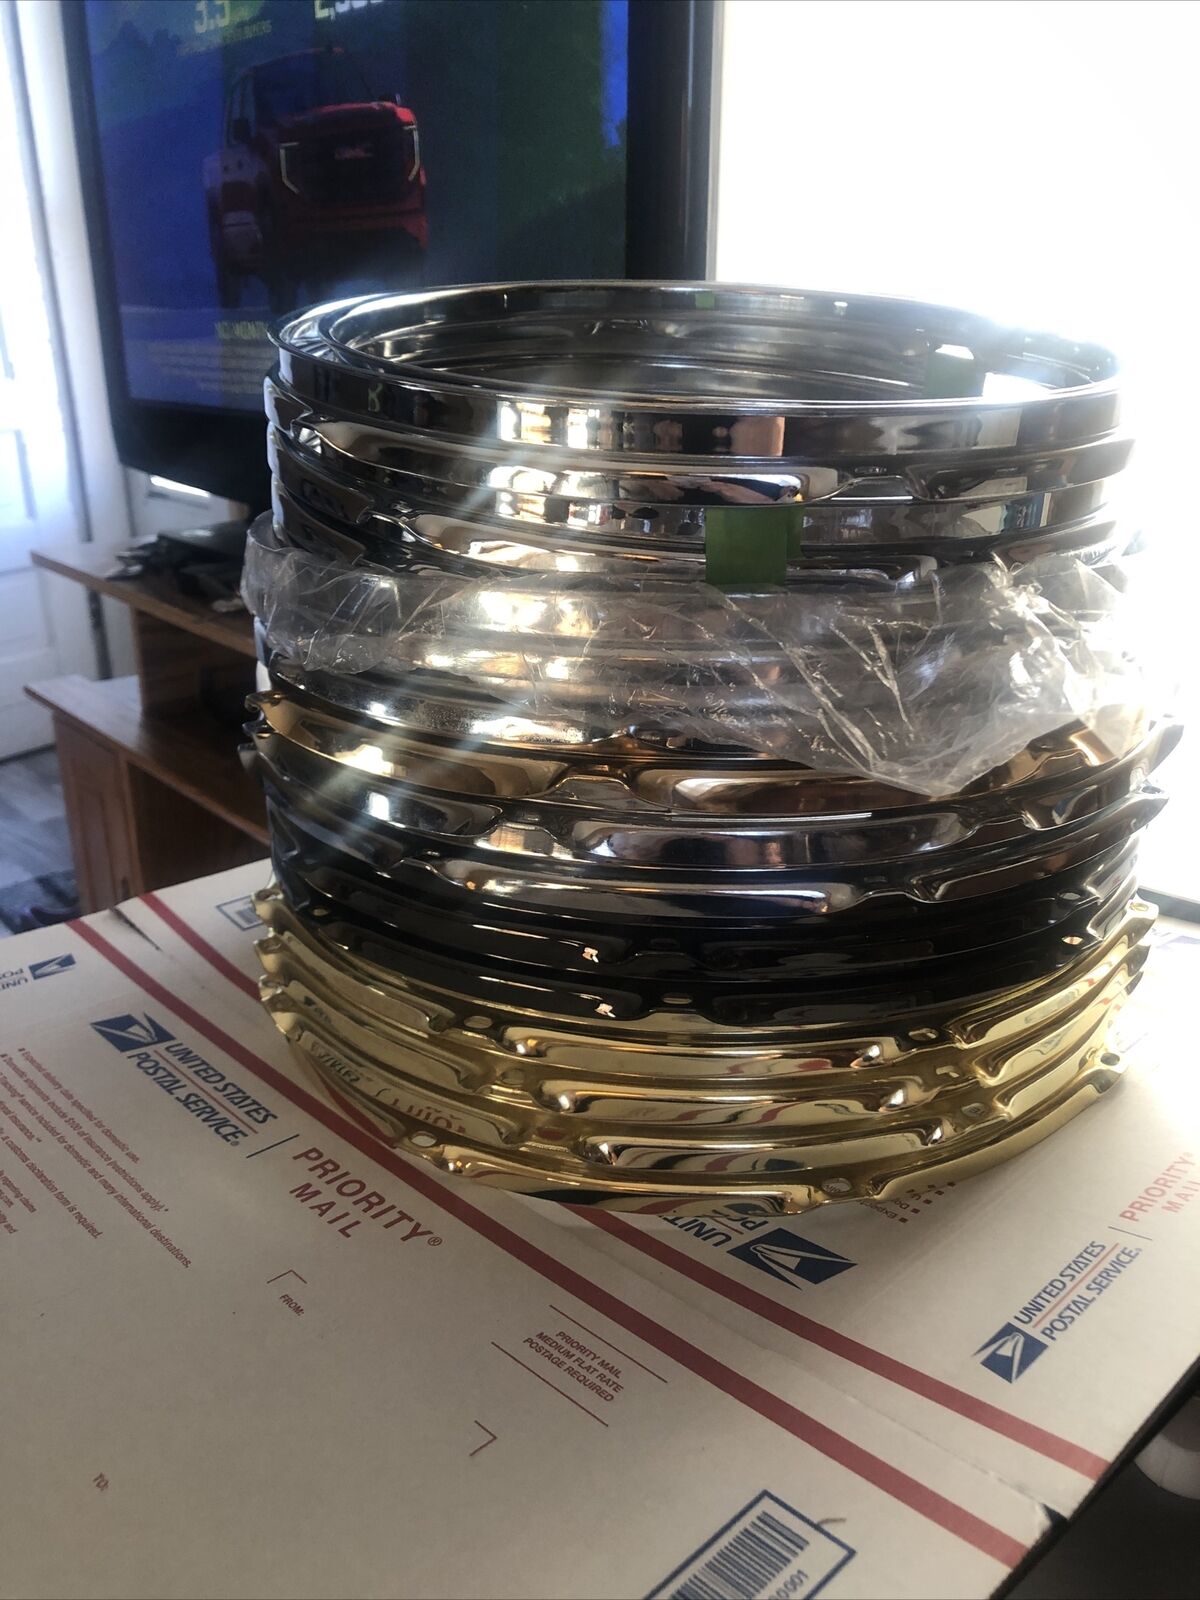 Generic Lot of Mostly 14 inch 8 Hole Chrome Snare Drum Hoops Rims 17 Total